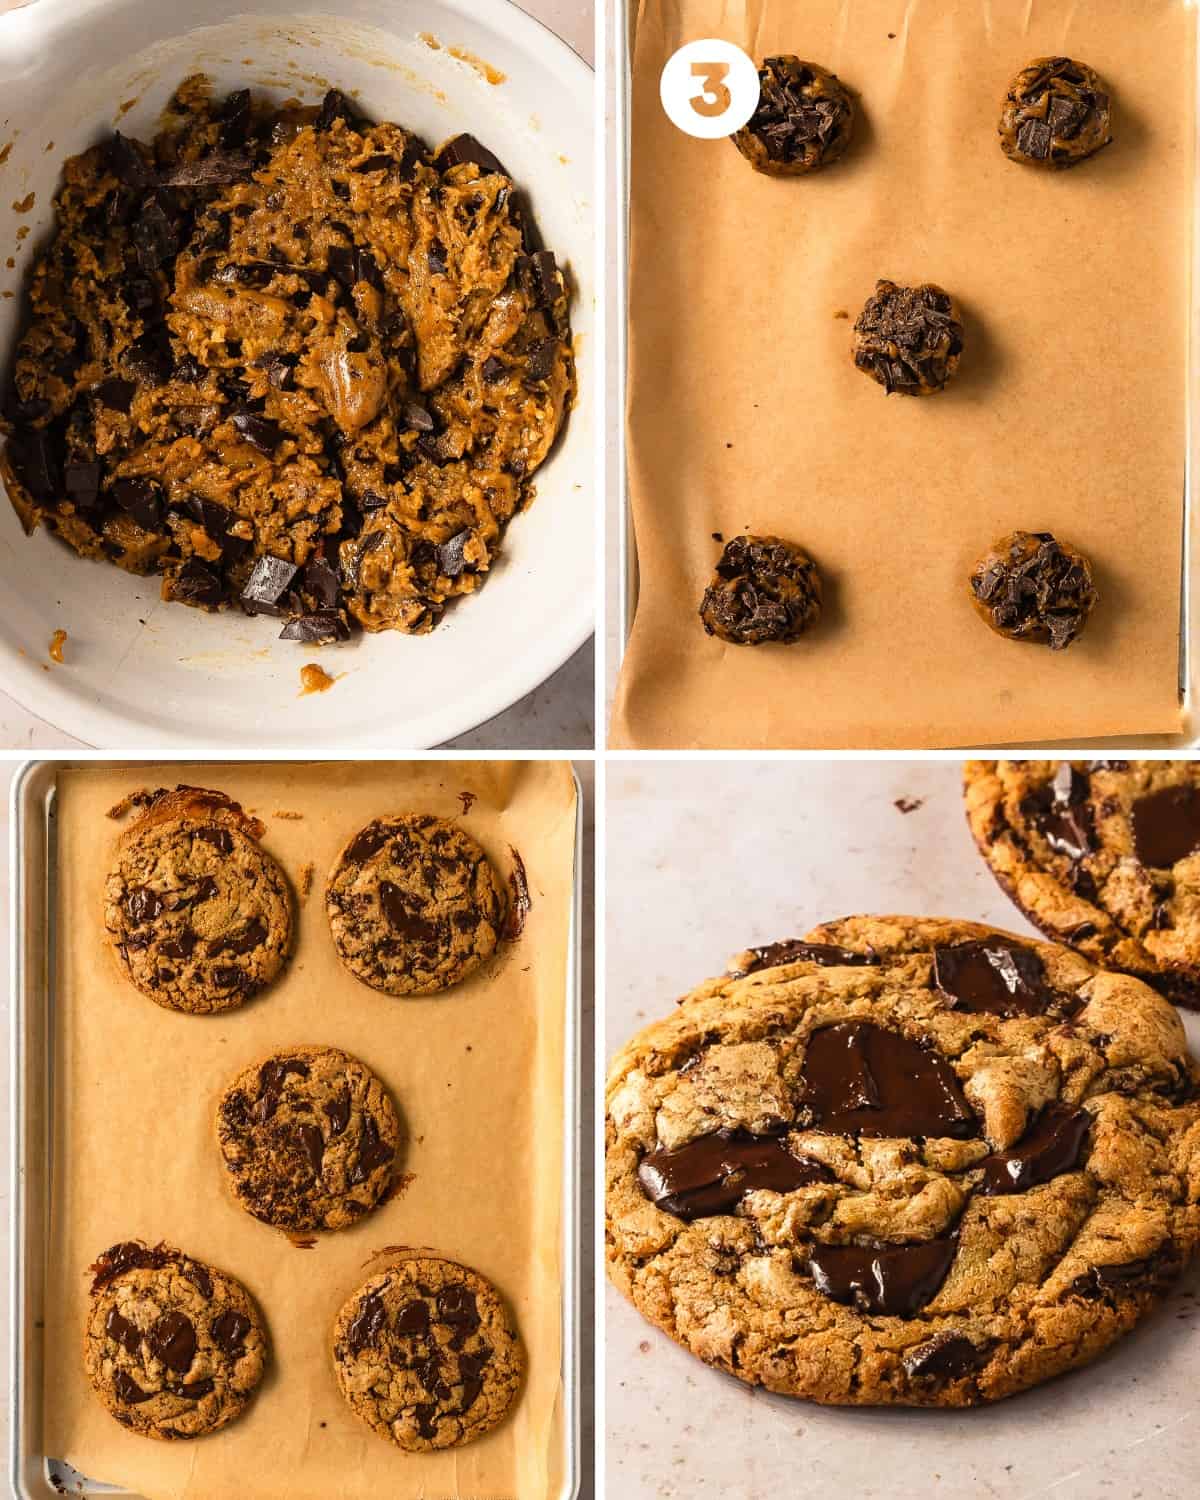 Cover the cookies with plastic wrap and transfer to the fridge to chill for 30 minutes or up to overnight. About 30 minutes before baking the cookies, preheat the oven to 375 F (190 C). Line a large baking sheet with parchment paper. Using a large cookie scoop (3 tablespoons, 45 ml), scoop the olive oil chocolate chip cookie dough and place the cookie dough balls onto the lined baking sheet about 3 inches (8 cm) apart. Top with the reserved chocolate chips or chunks. Bake for 12 - 14 minutes or until the edges of the cookies are set and the centers are slightly puffed. Cool the chewy olive oil cookies on the baking sheet for 5 minutes. If the cookies transfer easily at 5 minutes, then transfer to a cooling rack to cool completely to room temperature. If not, allow them to cool for an additional 5 minutes on the warm baking sheet, transfer to the cooling rack and enjoy! 